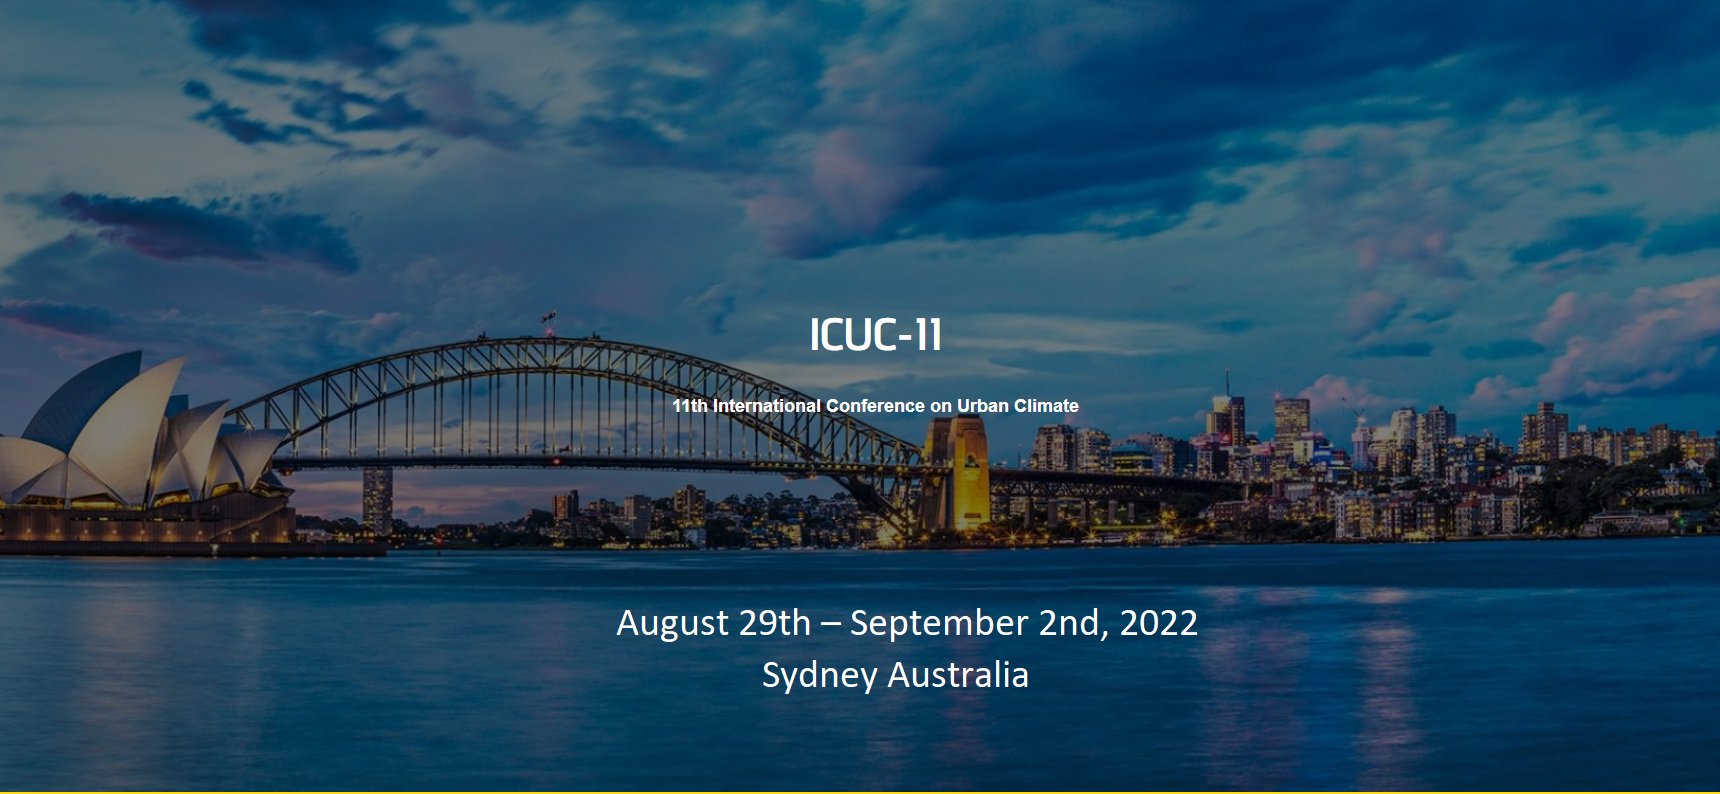 11th International Conference on Urban Climate